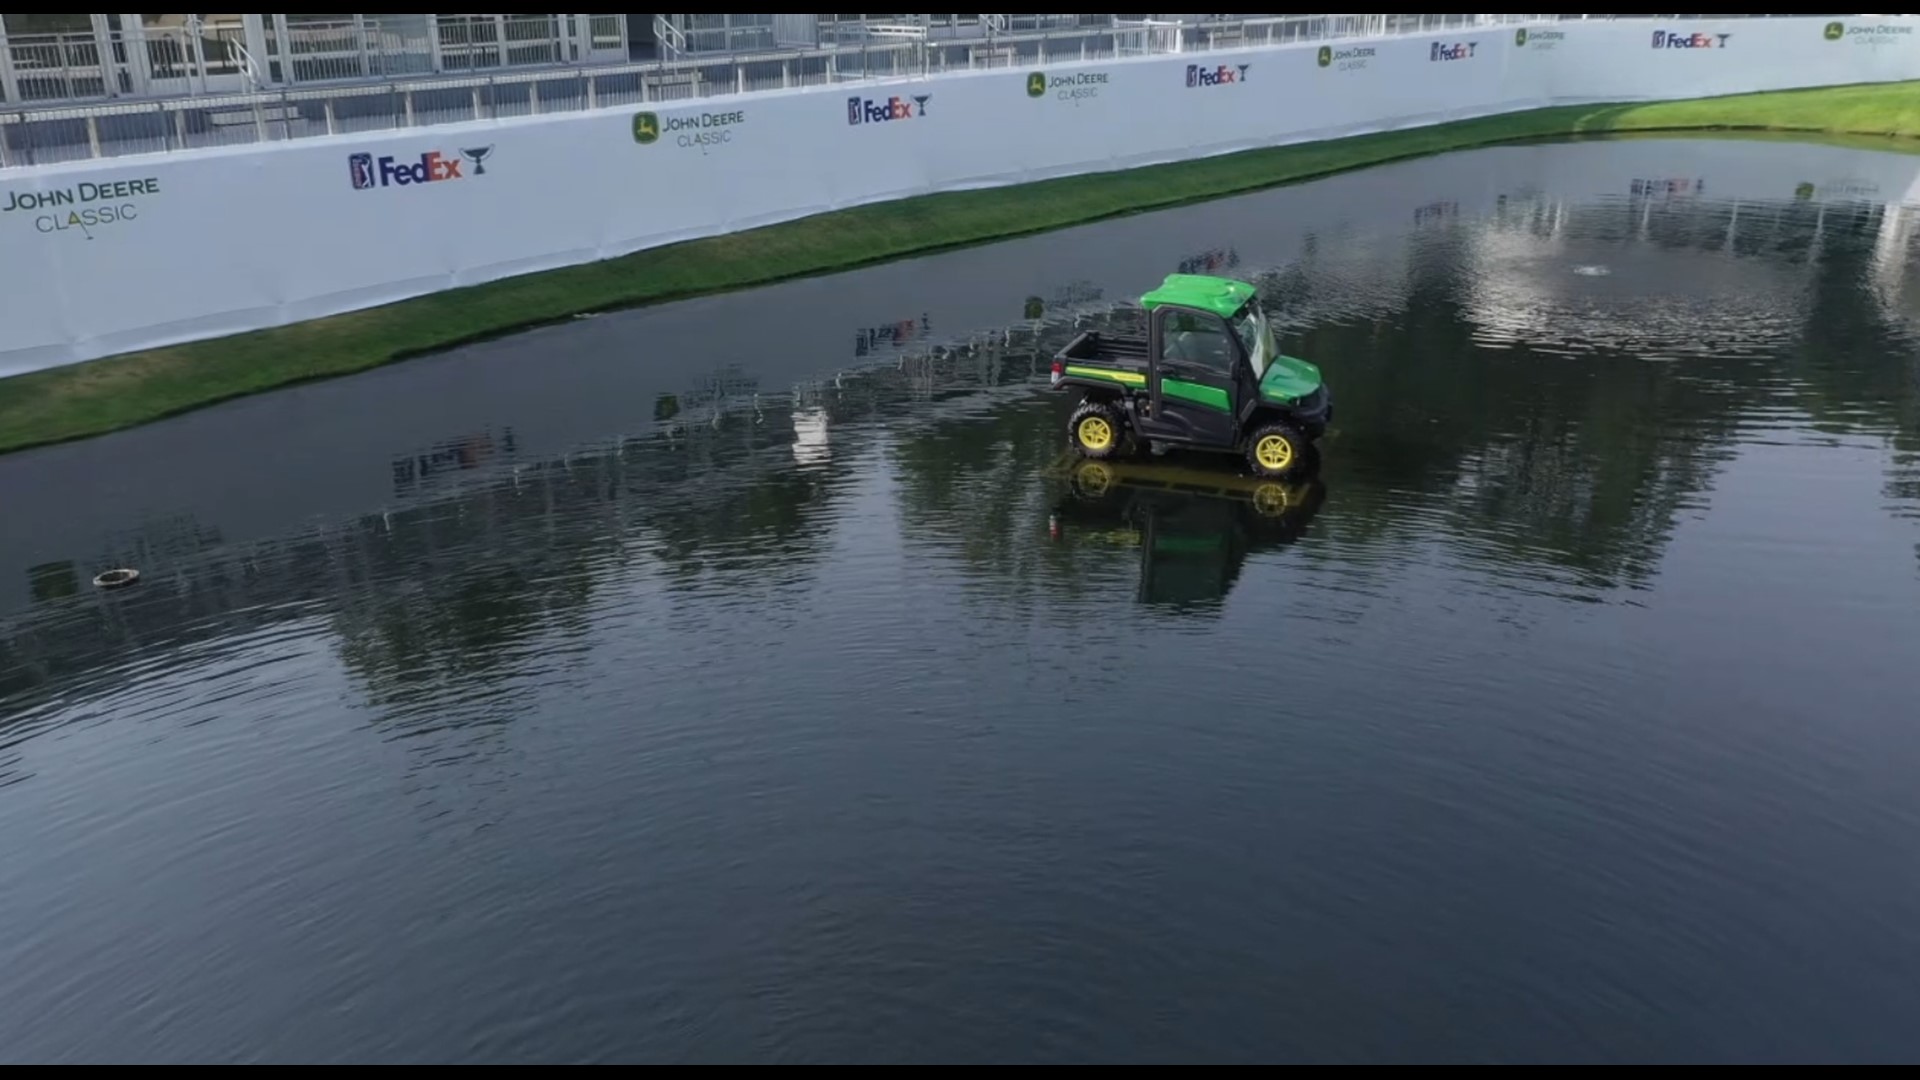 New at this year's John Deere Classic, a gator floats atop the pond on the 18th Hole. Turns out, it's all thanks to a few hardworking local students.